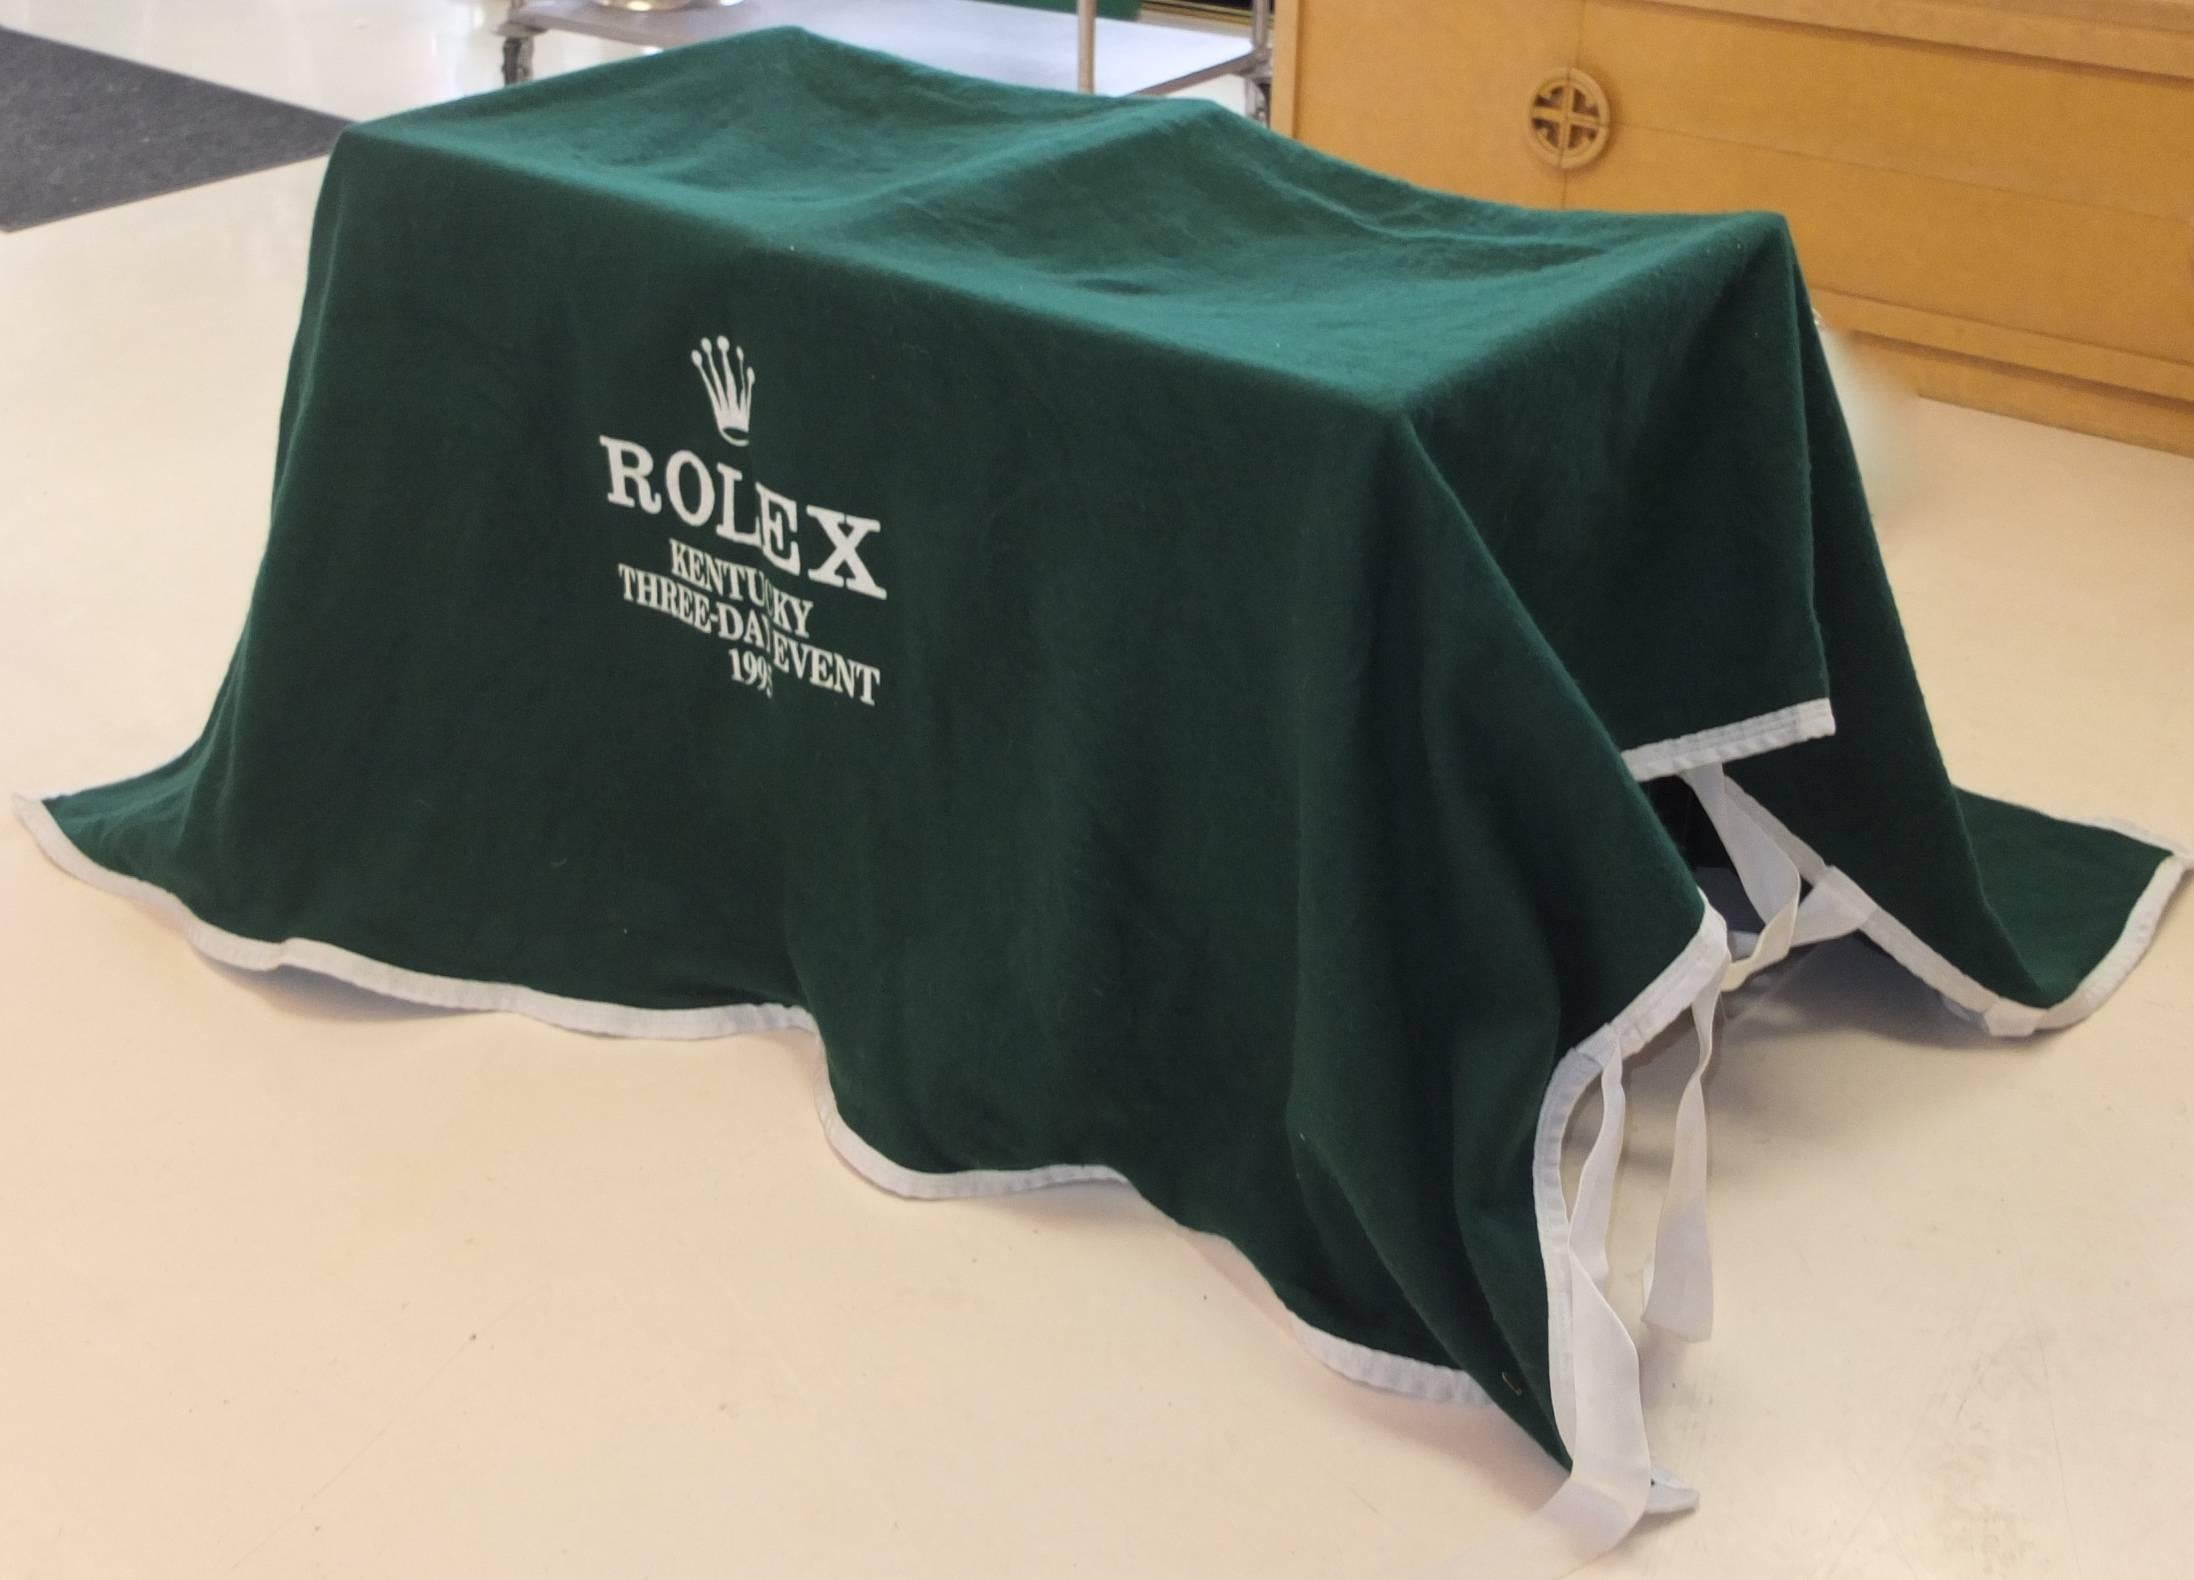 American Classical Horse Blanket from 1995 Rolex Kentucky Three-Day Event